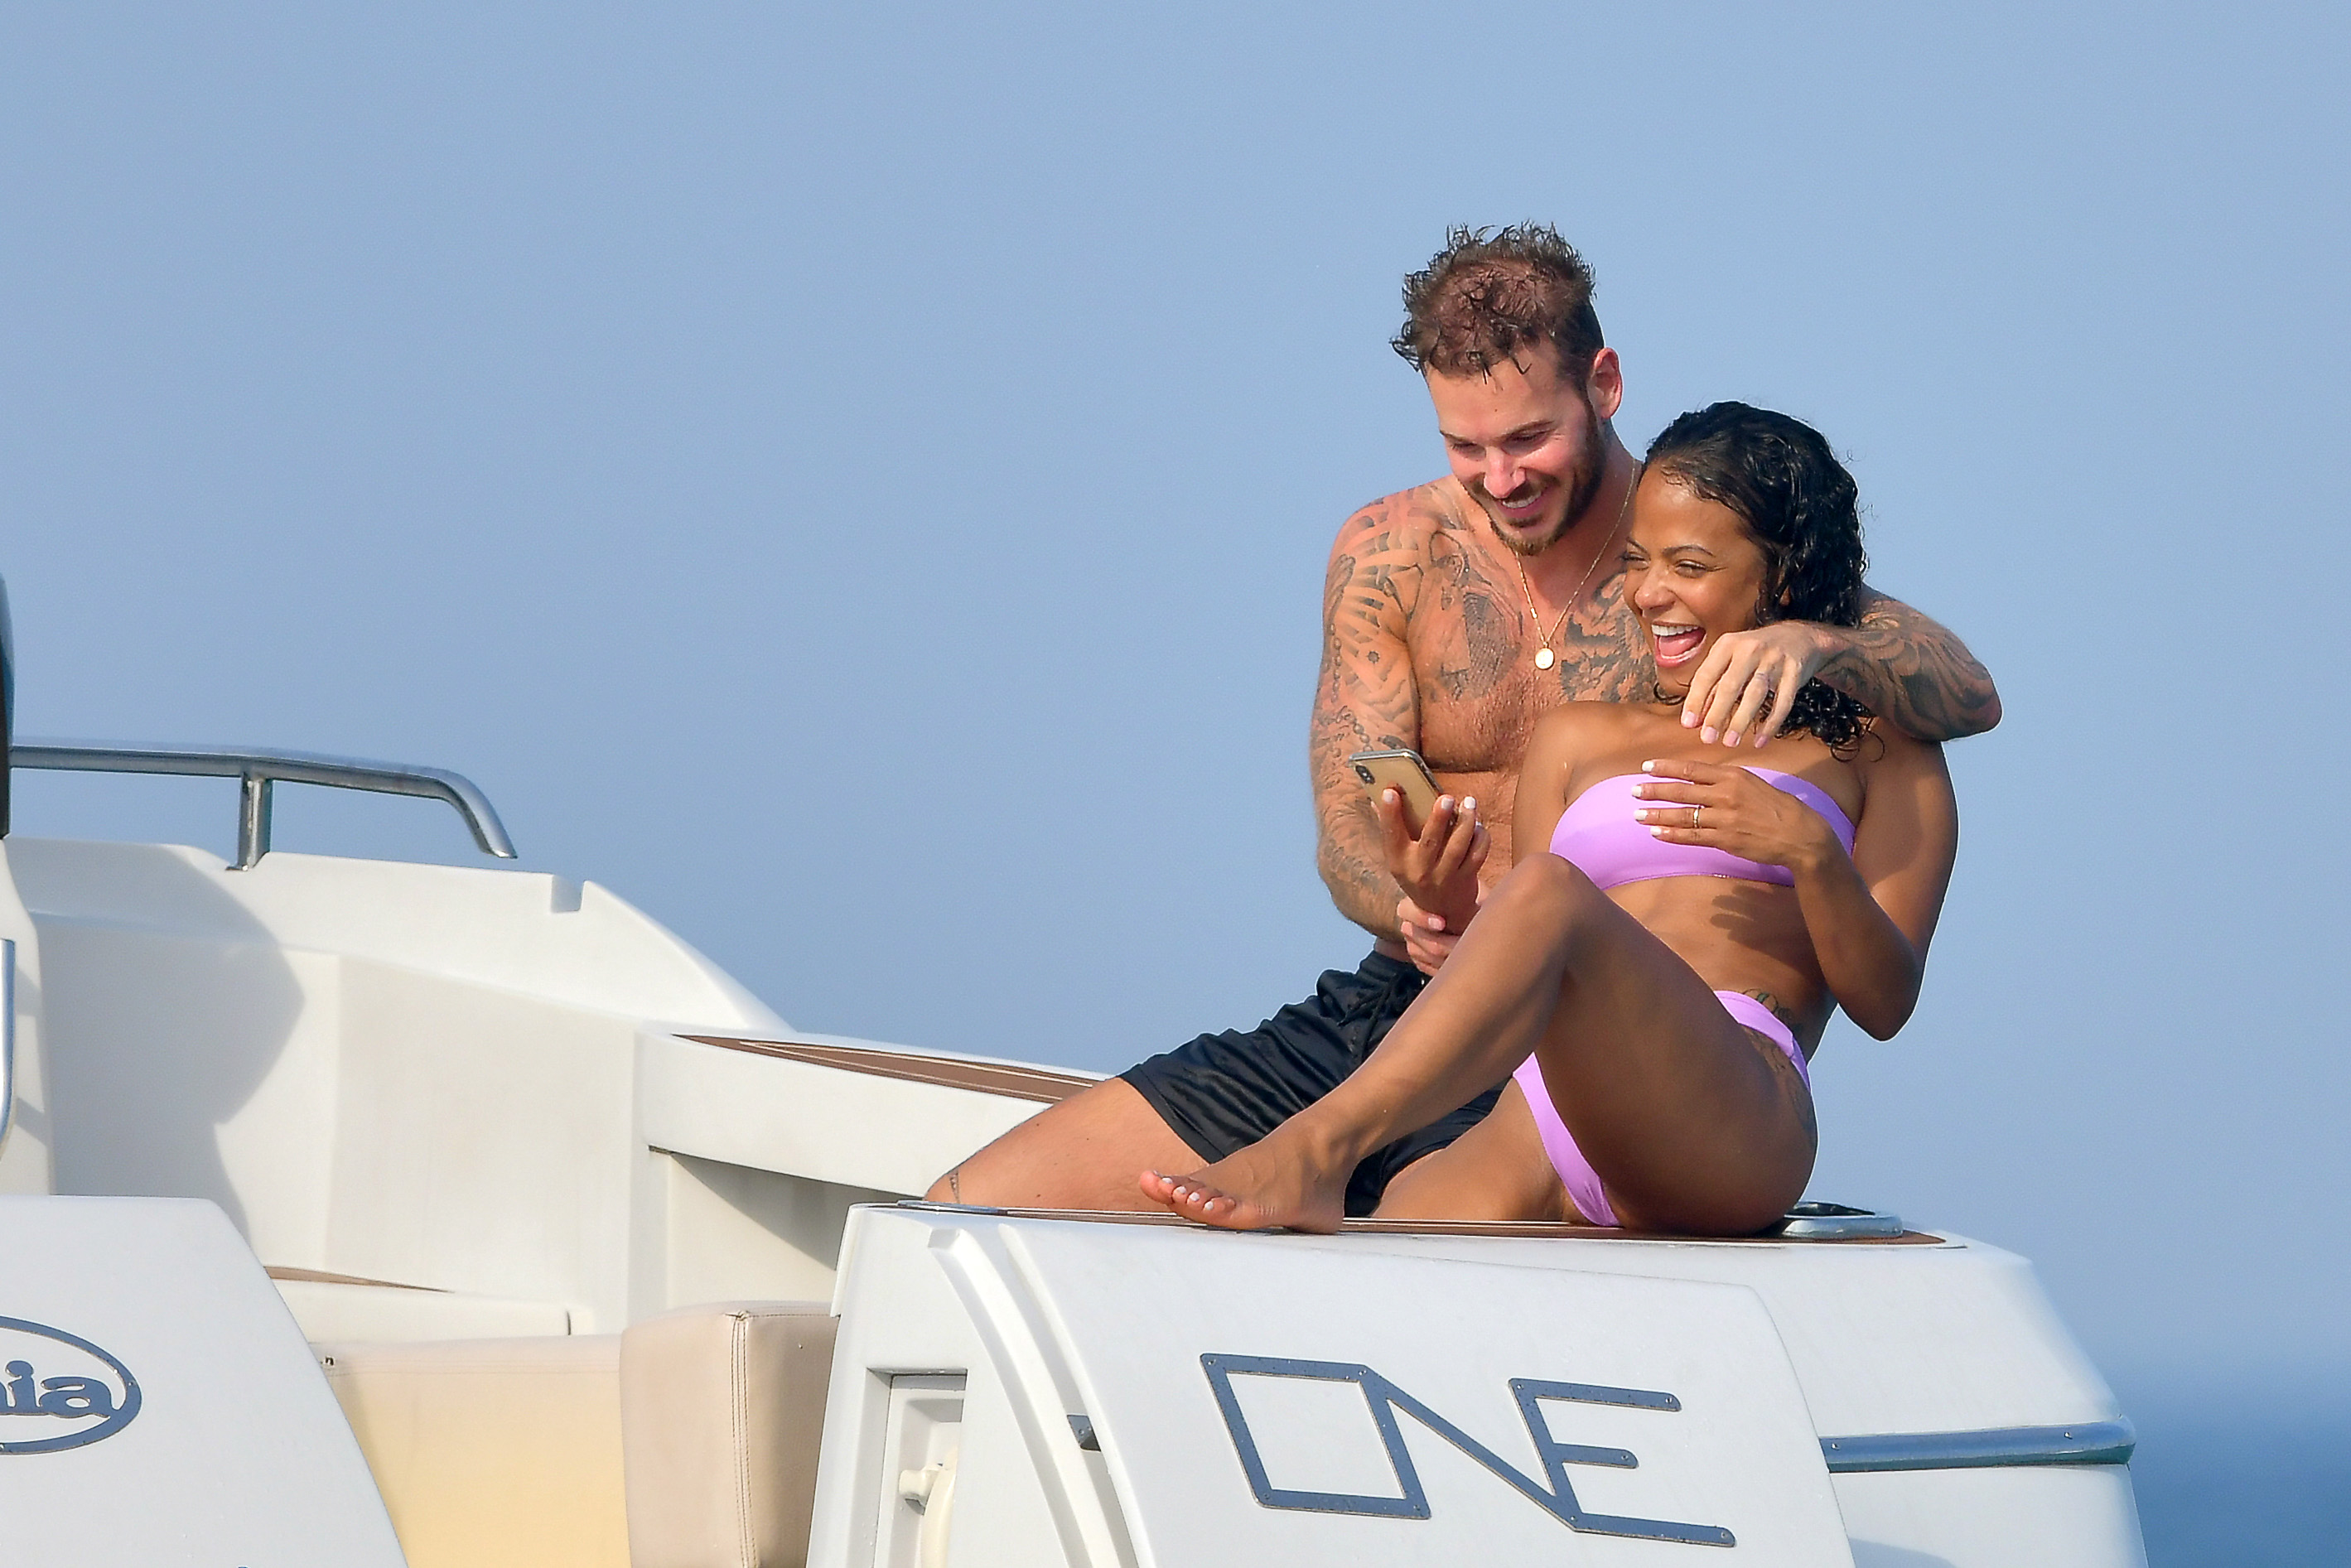 Christina Milian pokies and cameltoe in sexy bikini candids on a boat during holiday UHQ (16).jpg